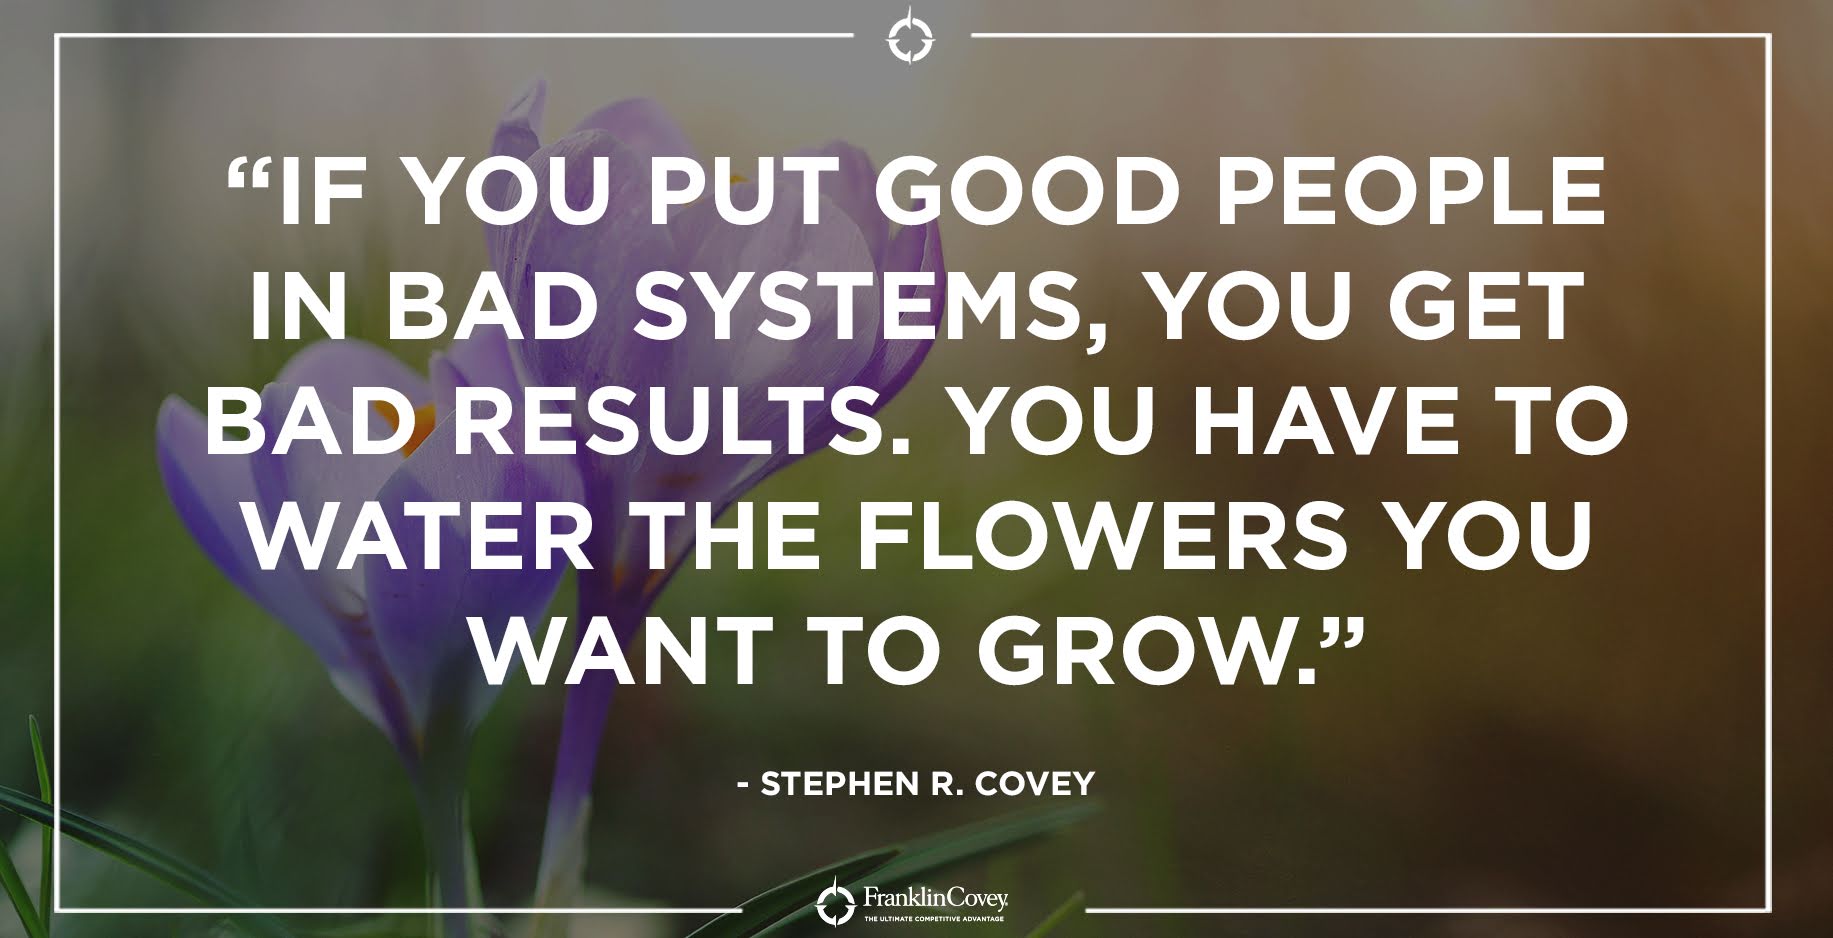 Source: Stephen R. Covey Twitter feed